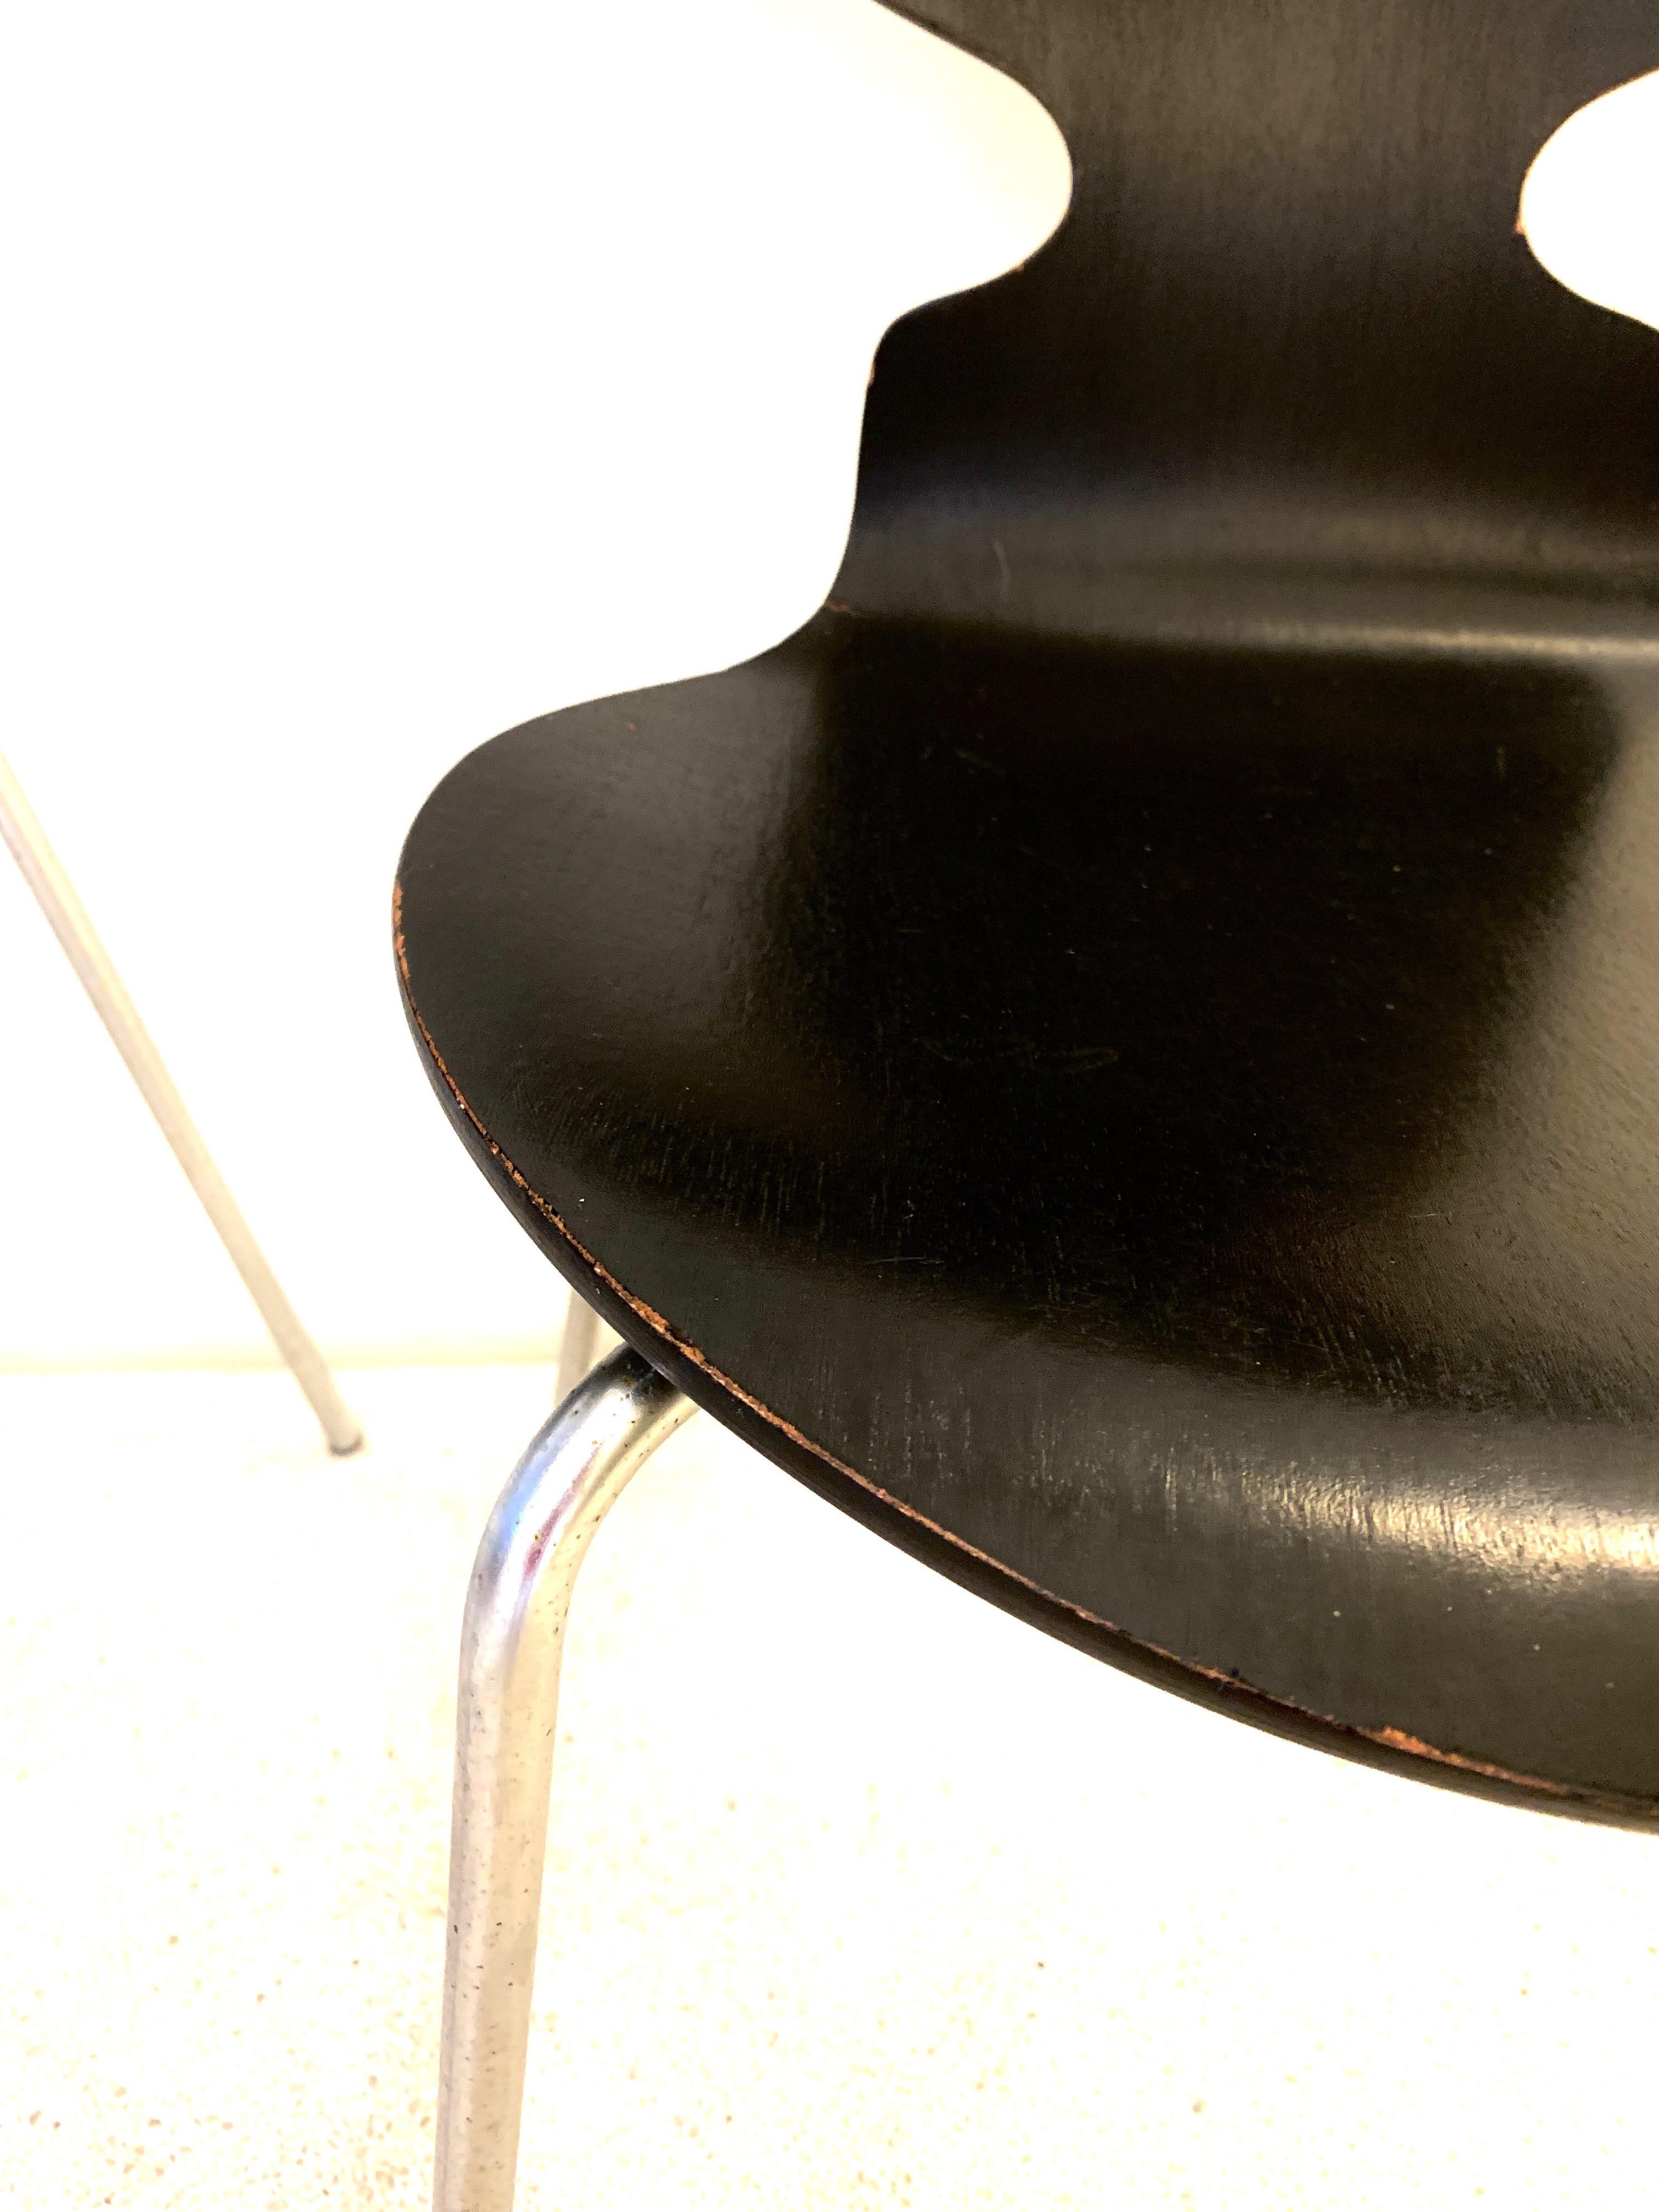 Iconic model 3100 'Ant' chair by Arne Jacobsen for Fritz Hansen.

Model 3101 'Ant' chairs were designed by Arne Jacobsen in 1952. These pieces produced in 1970s. Black lacquered bentwood on steel frame.
 